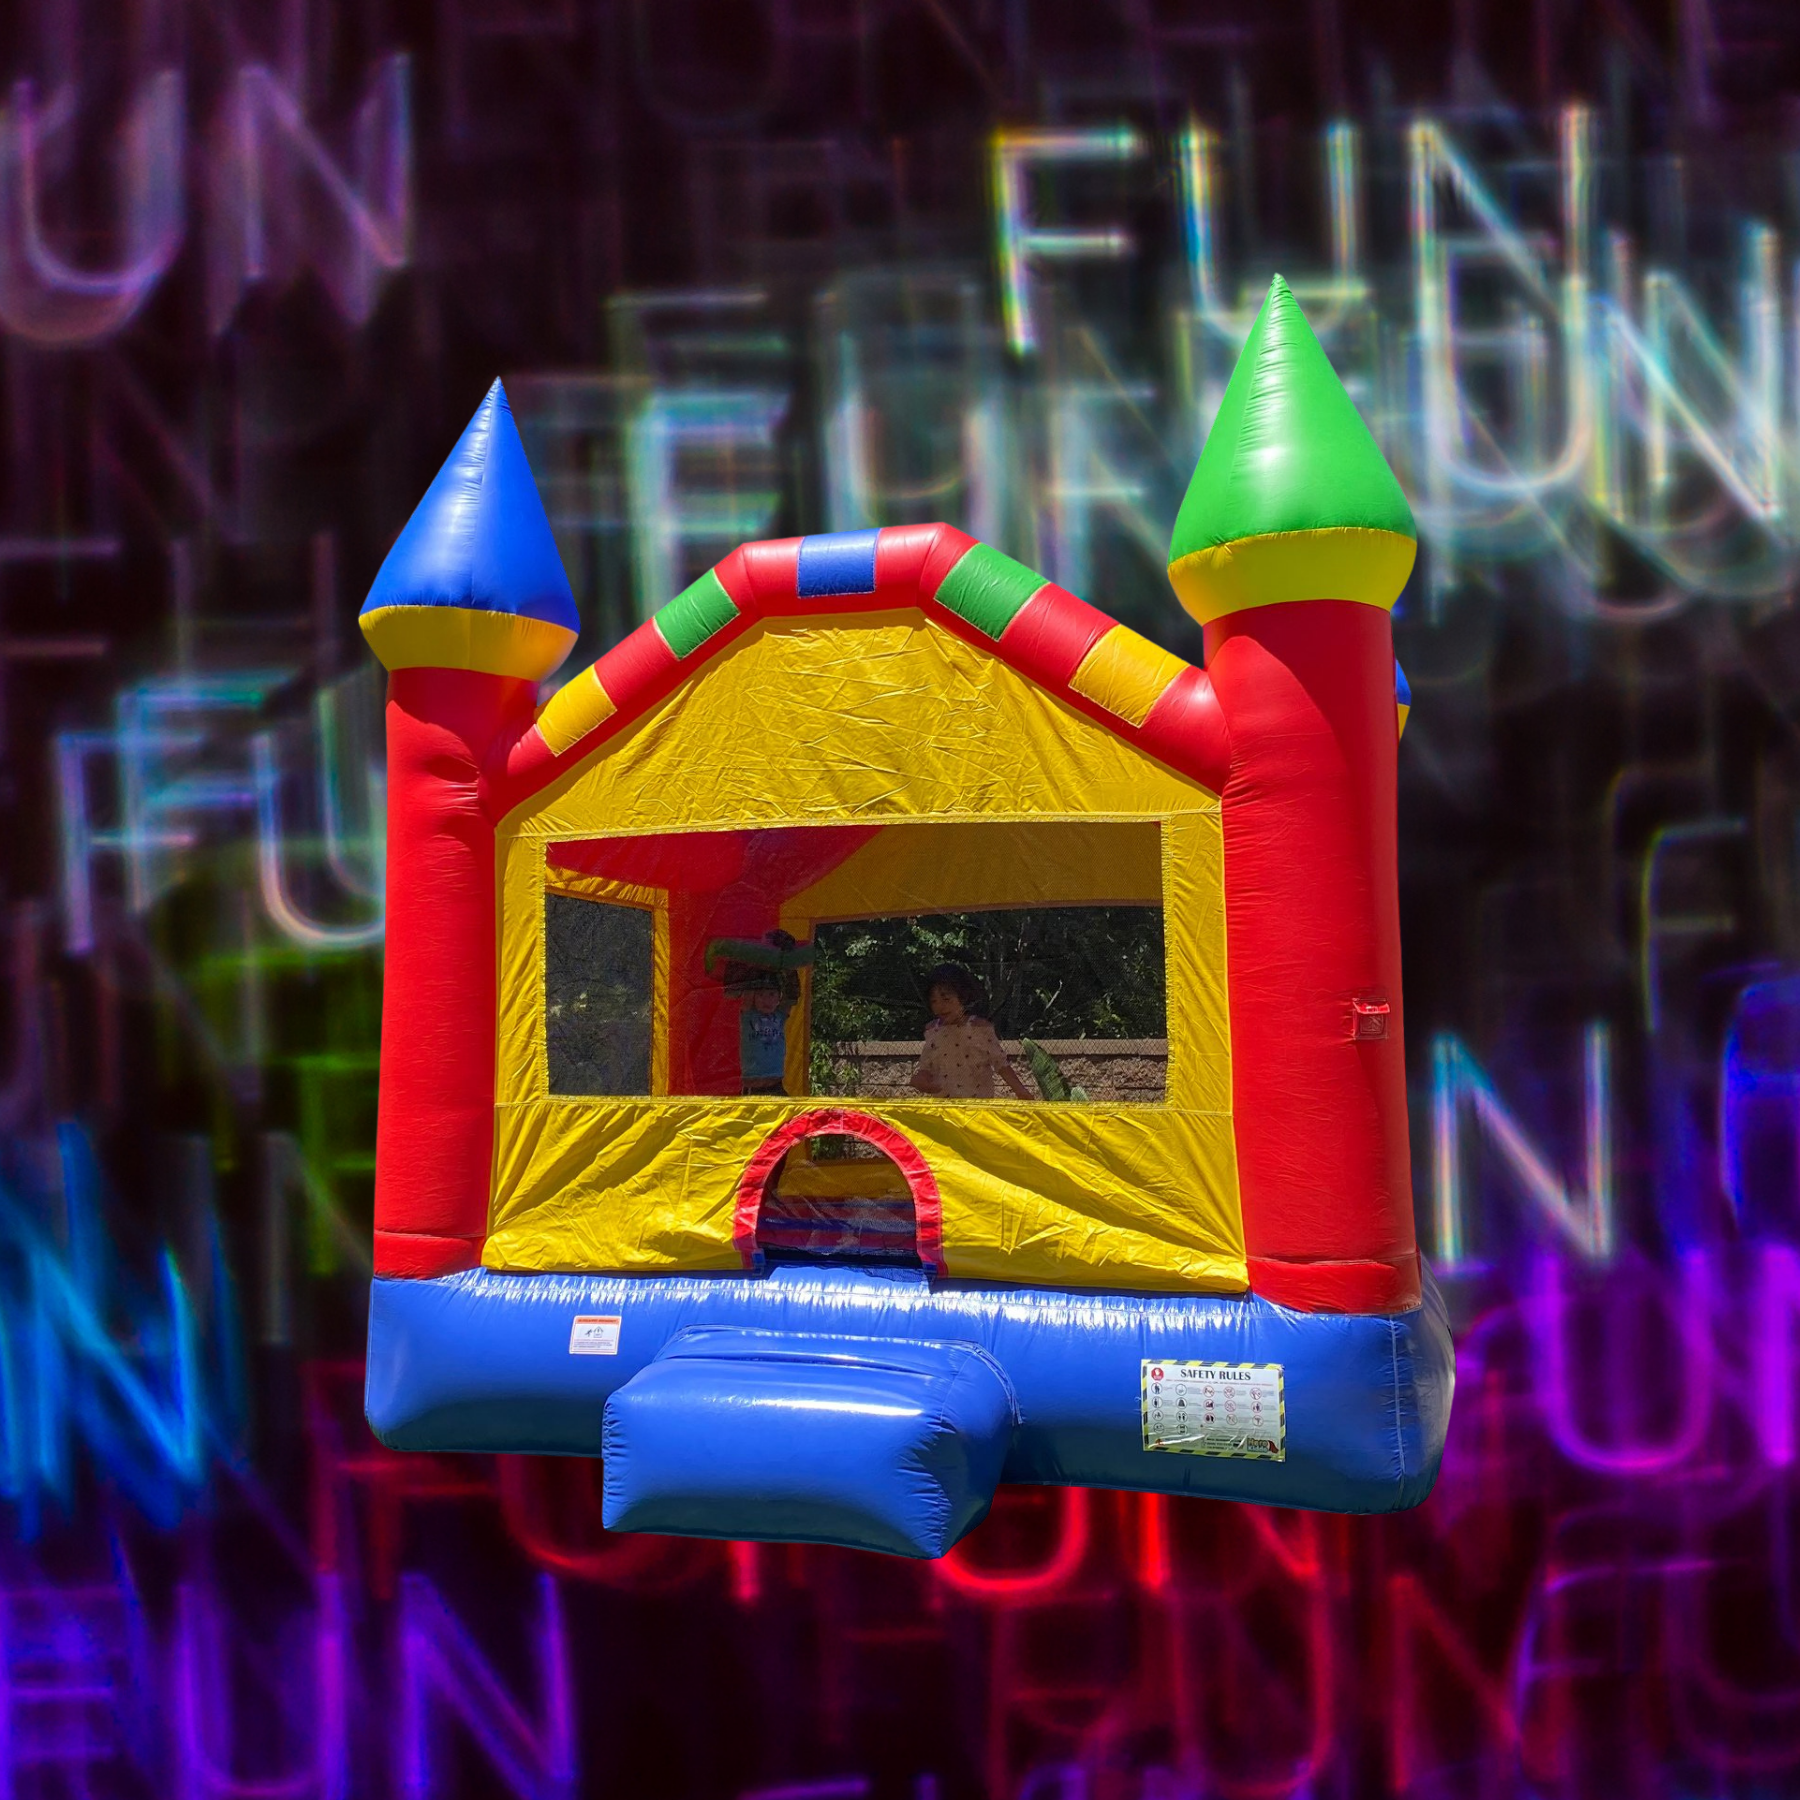 Primary Colored Bounce House